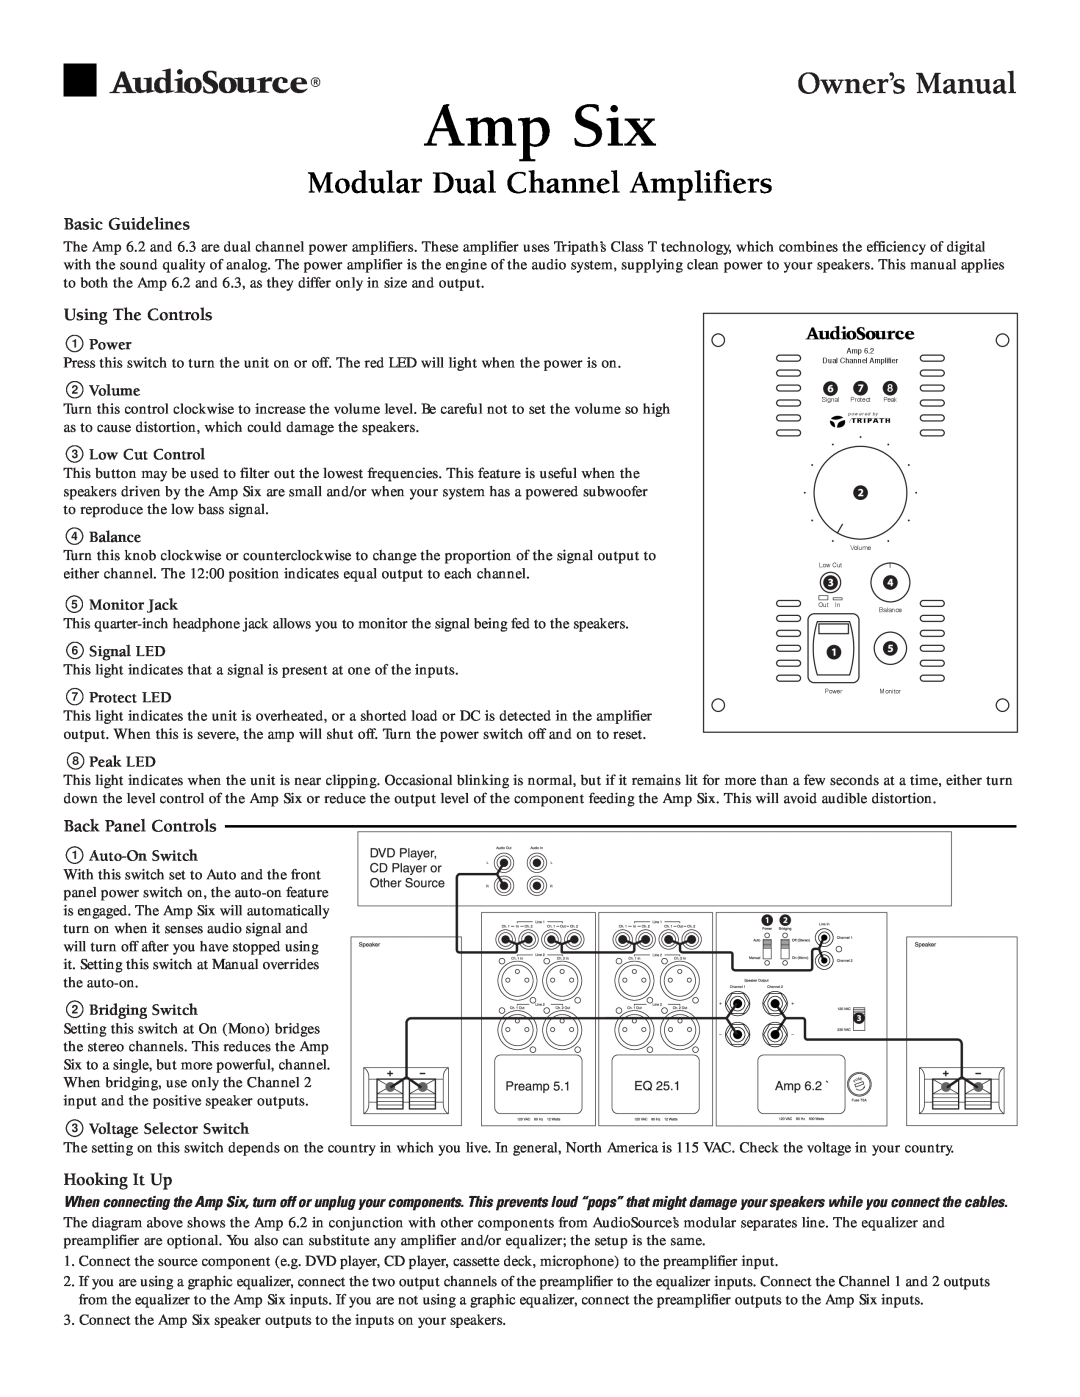 AudioSource Modular Dual Channel Amplifiers owner manual Basic Guidelines, Using The Controls, Back Panel Controls 